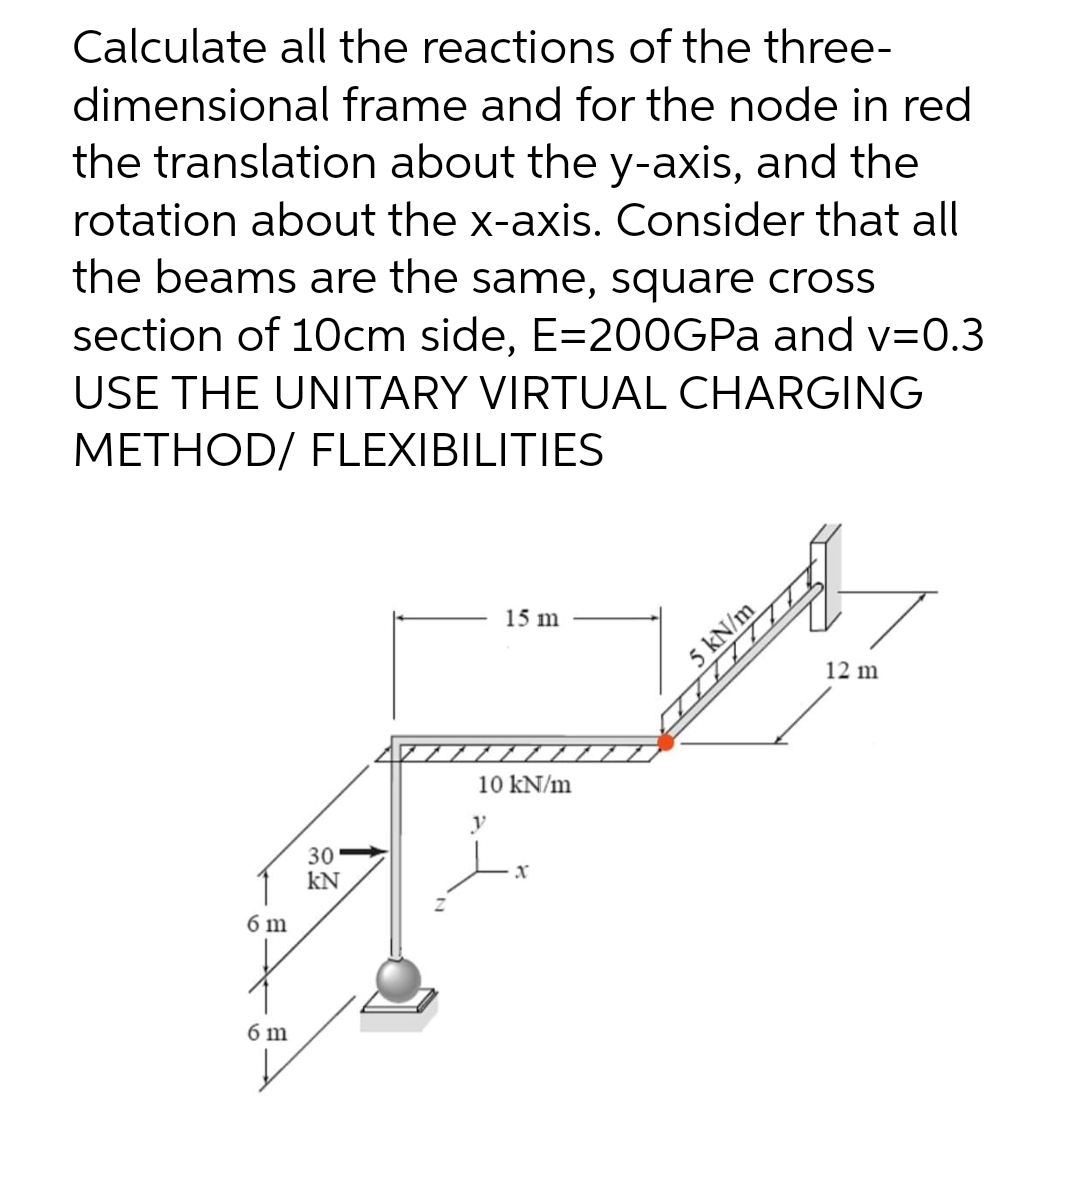 Calculate all the reactions of the three-
dimensional frame and for the node in red
the translation about the y-axis, and the
rotation about the x-axis. Consider that all
the beams are the same, square cross
section of 10cm side, E=200GPa and v=0.3
USE THE UNITARY VIRTUAL CHARGING
METHOD/ FLEXIBILITIES
15 m
10 kN/m
y
30
X
KN
6m
6 m
74
5 kN/m
12 m